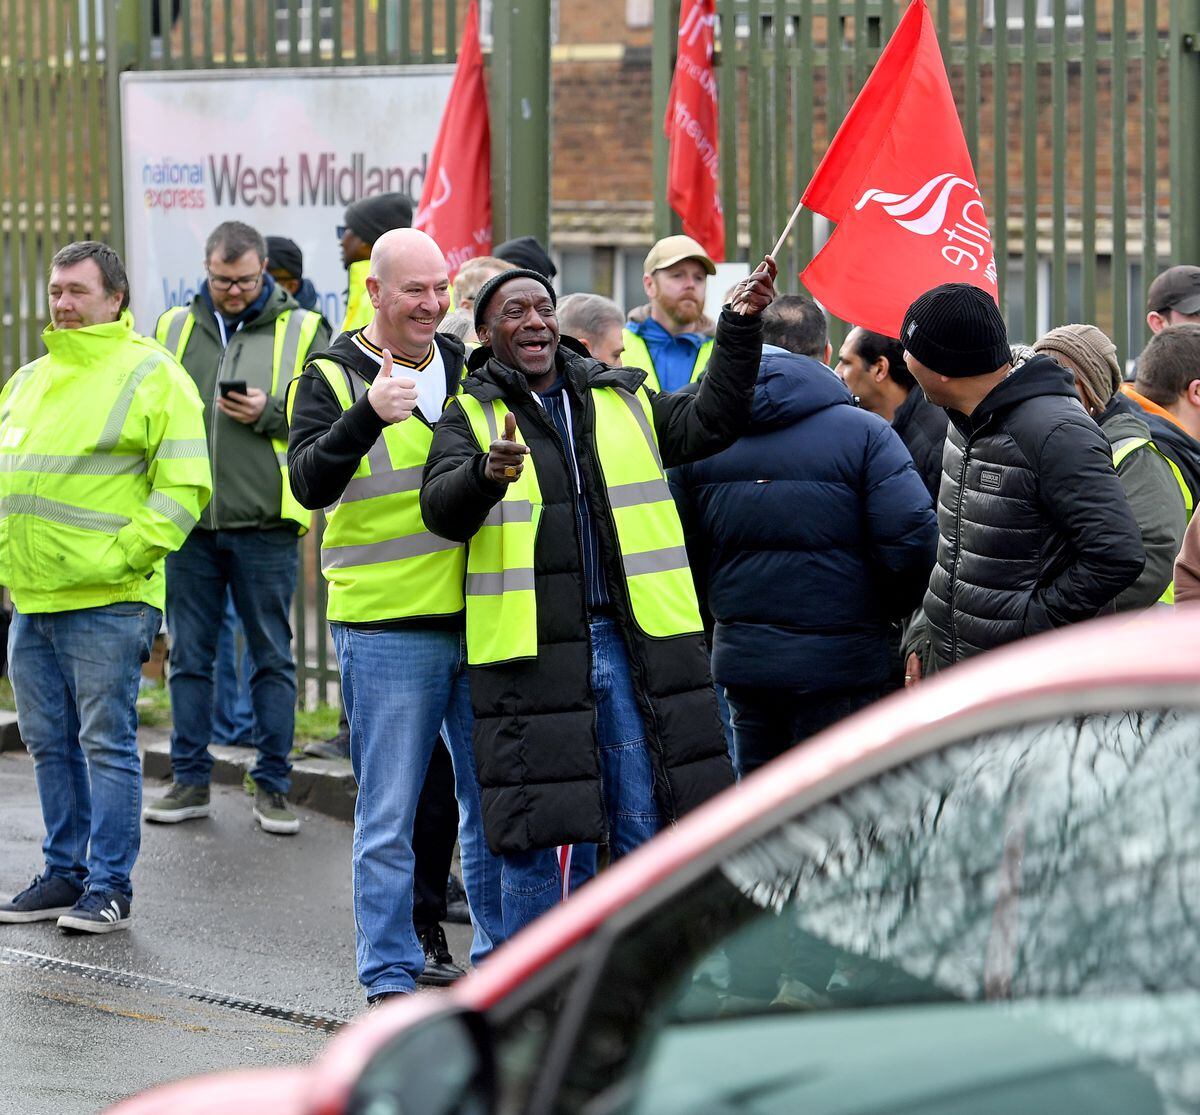 There were dozens of drivers out on the picket line